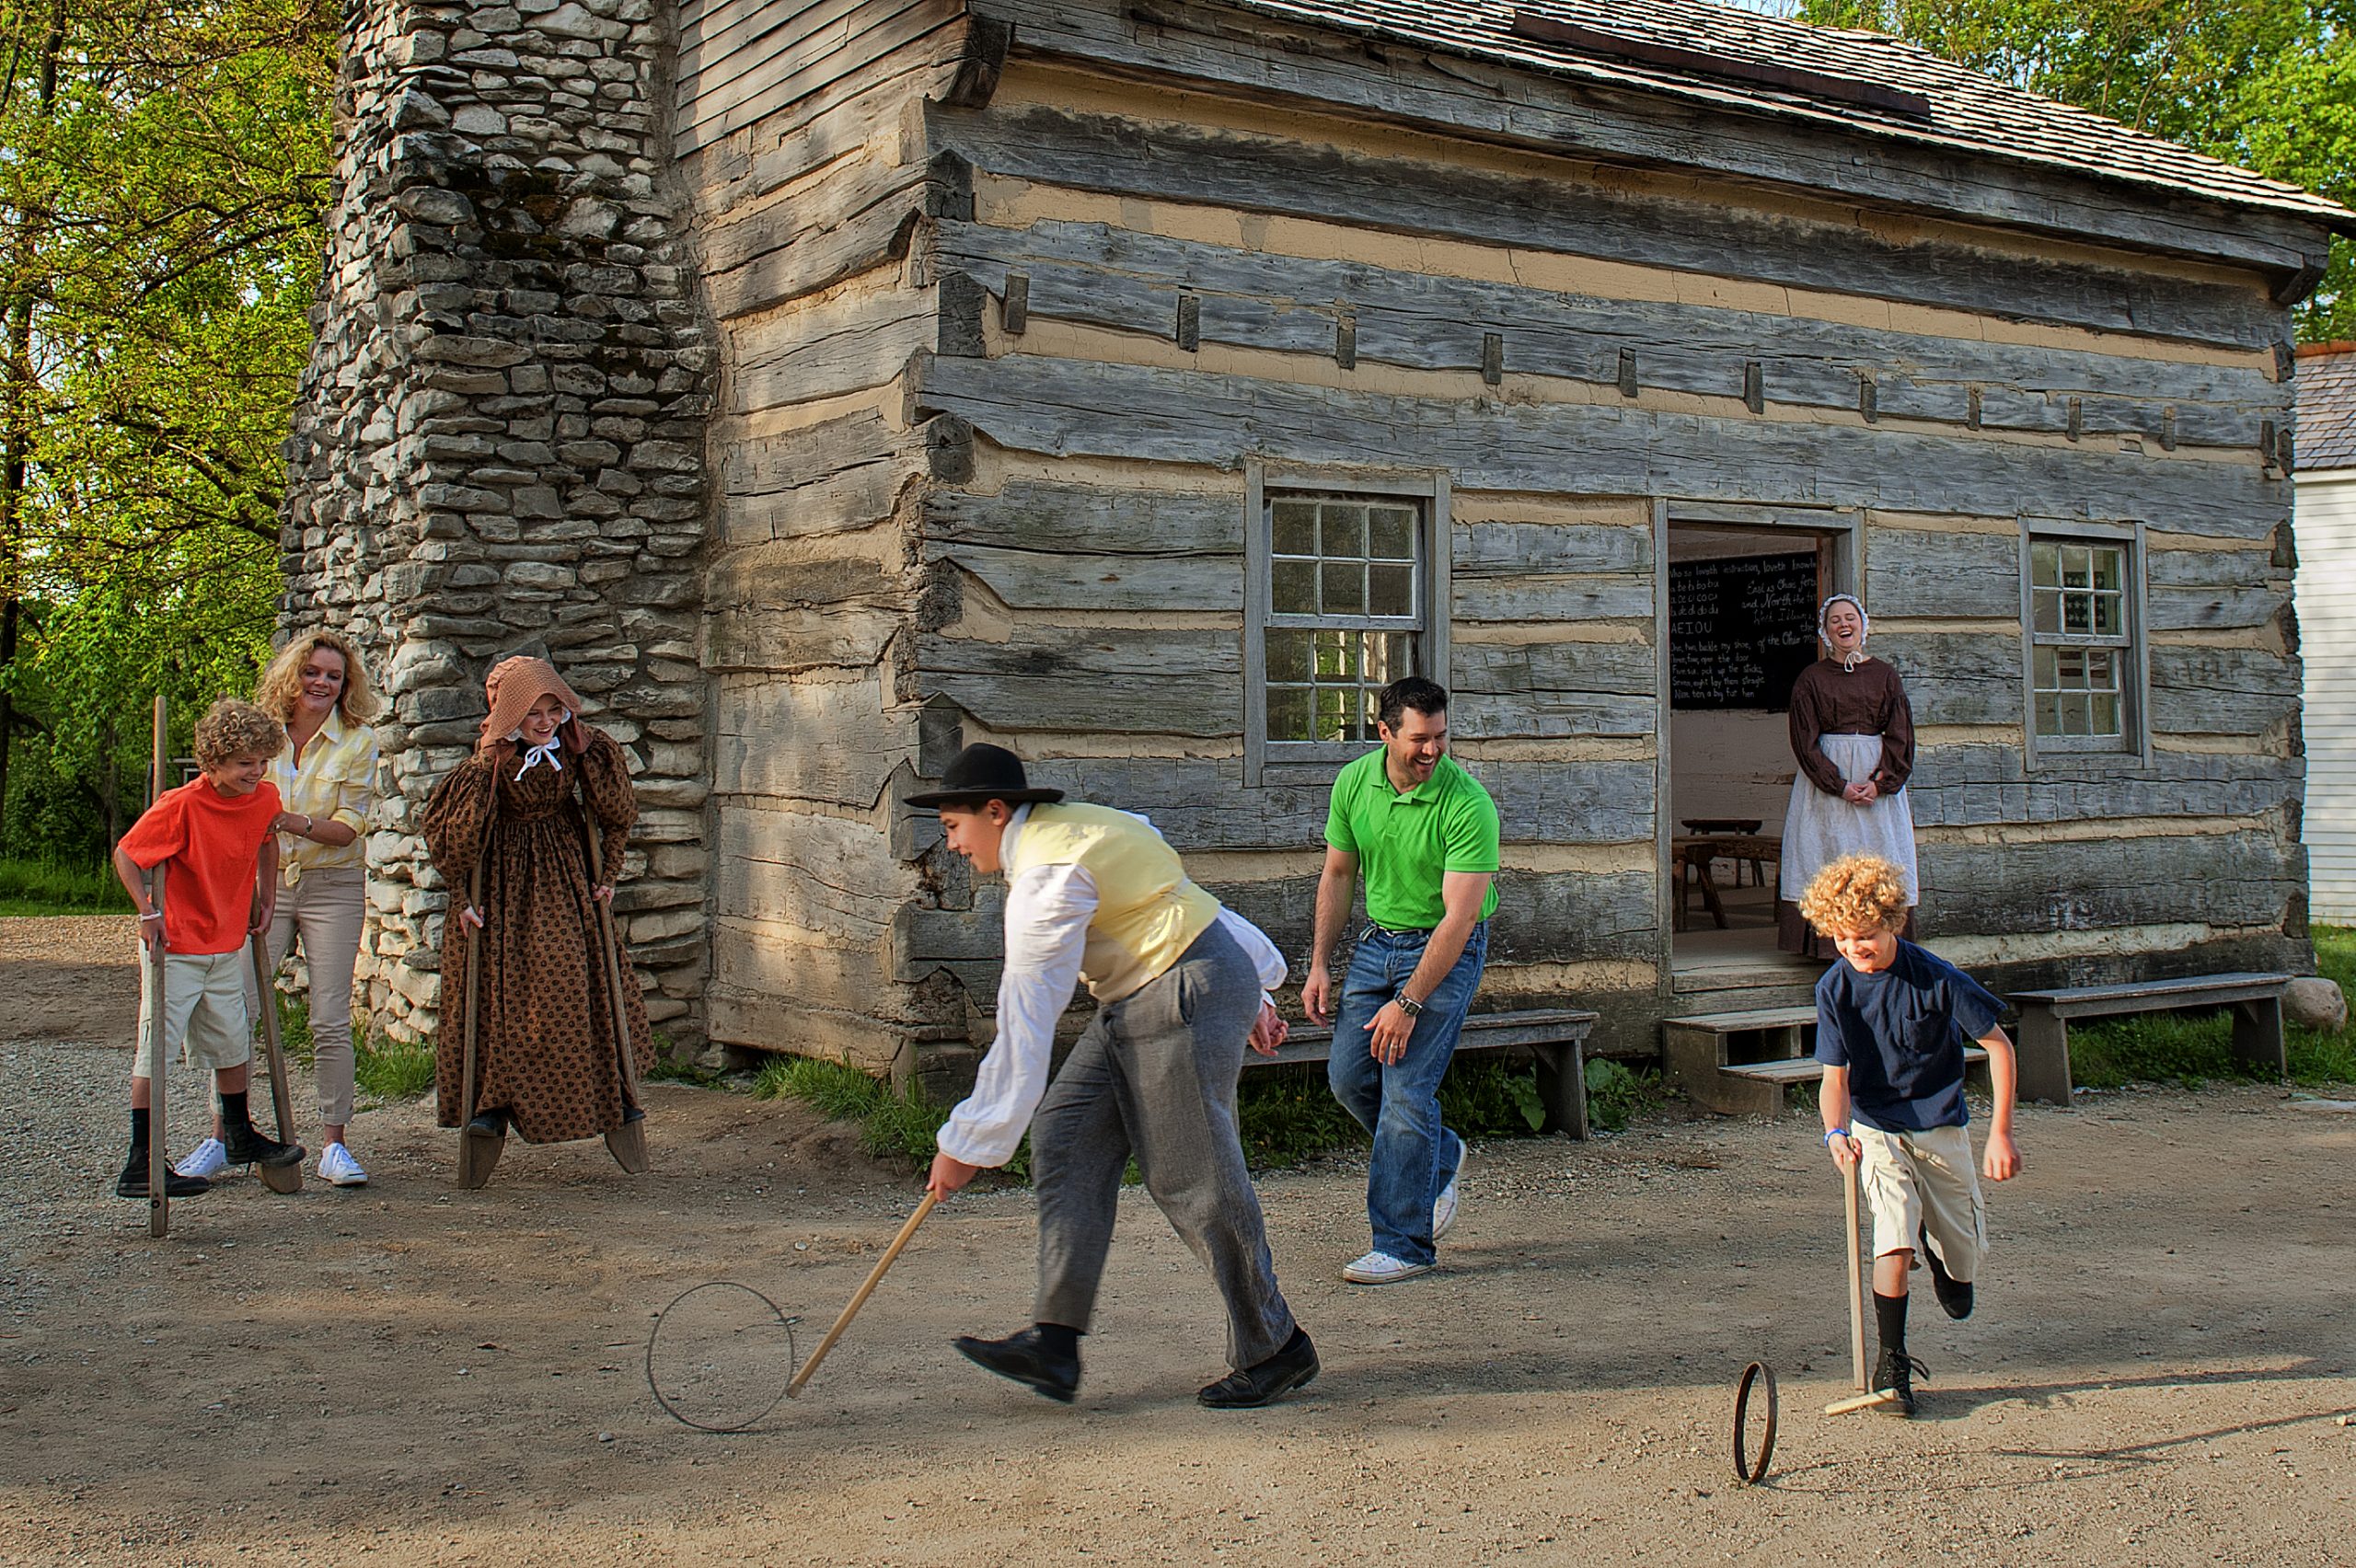 Three interpreters interact with a family. One interpreter shows a man and boy how to play a game with a hoop and stick. Another interpreter shows a child and woman how to use stilts. The other interpreter stands on the steps of the entrance to a log cabin.